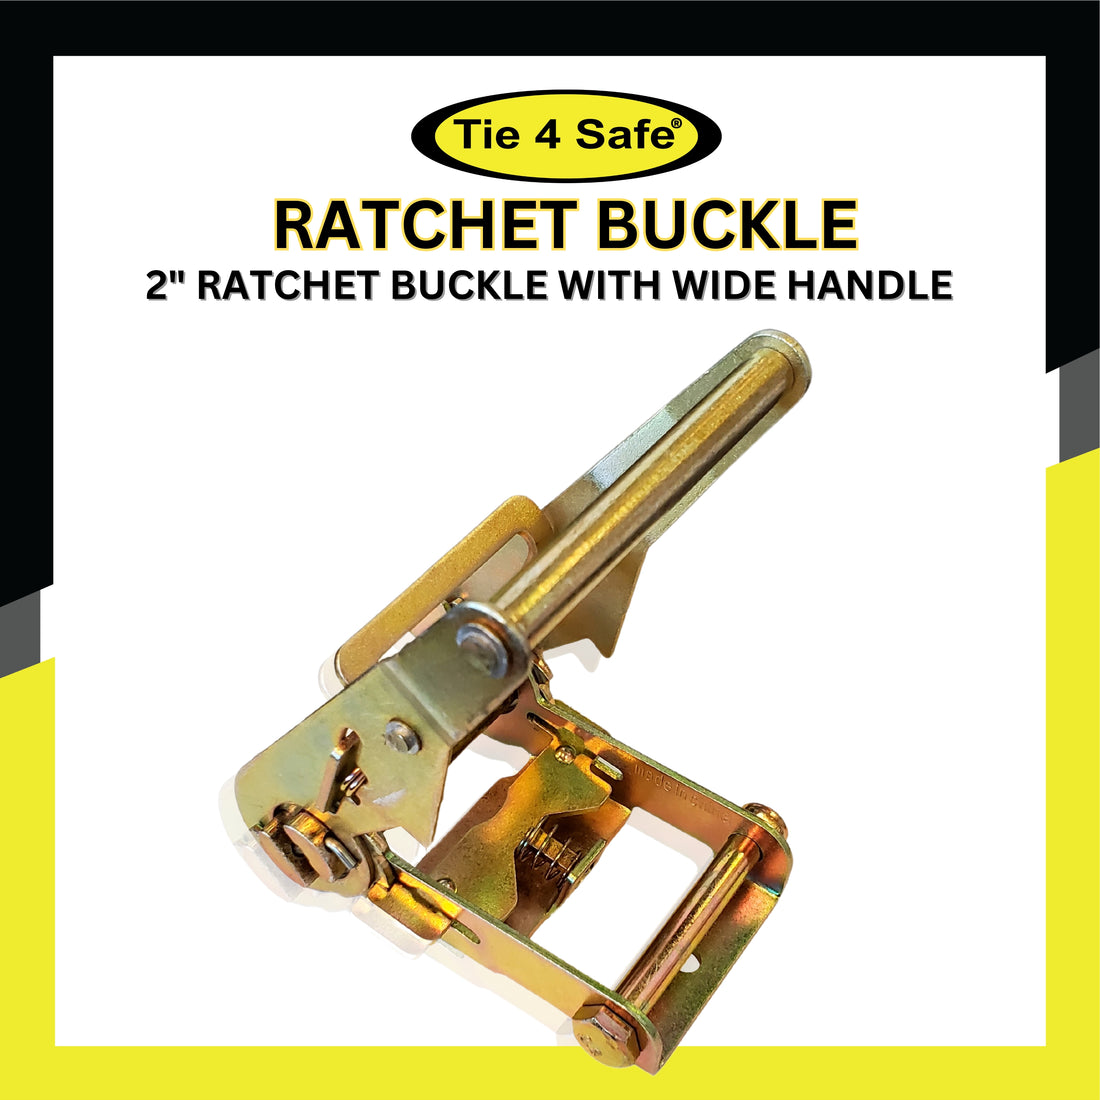 2" Ratchet Buckle With Wide Handle